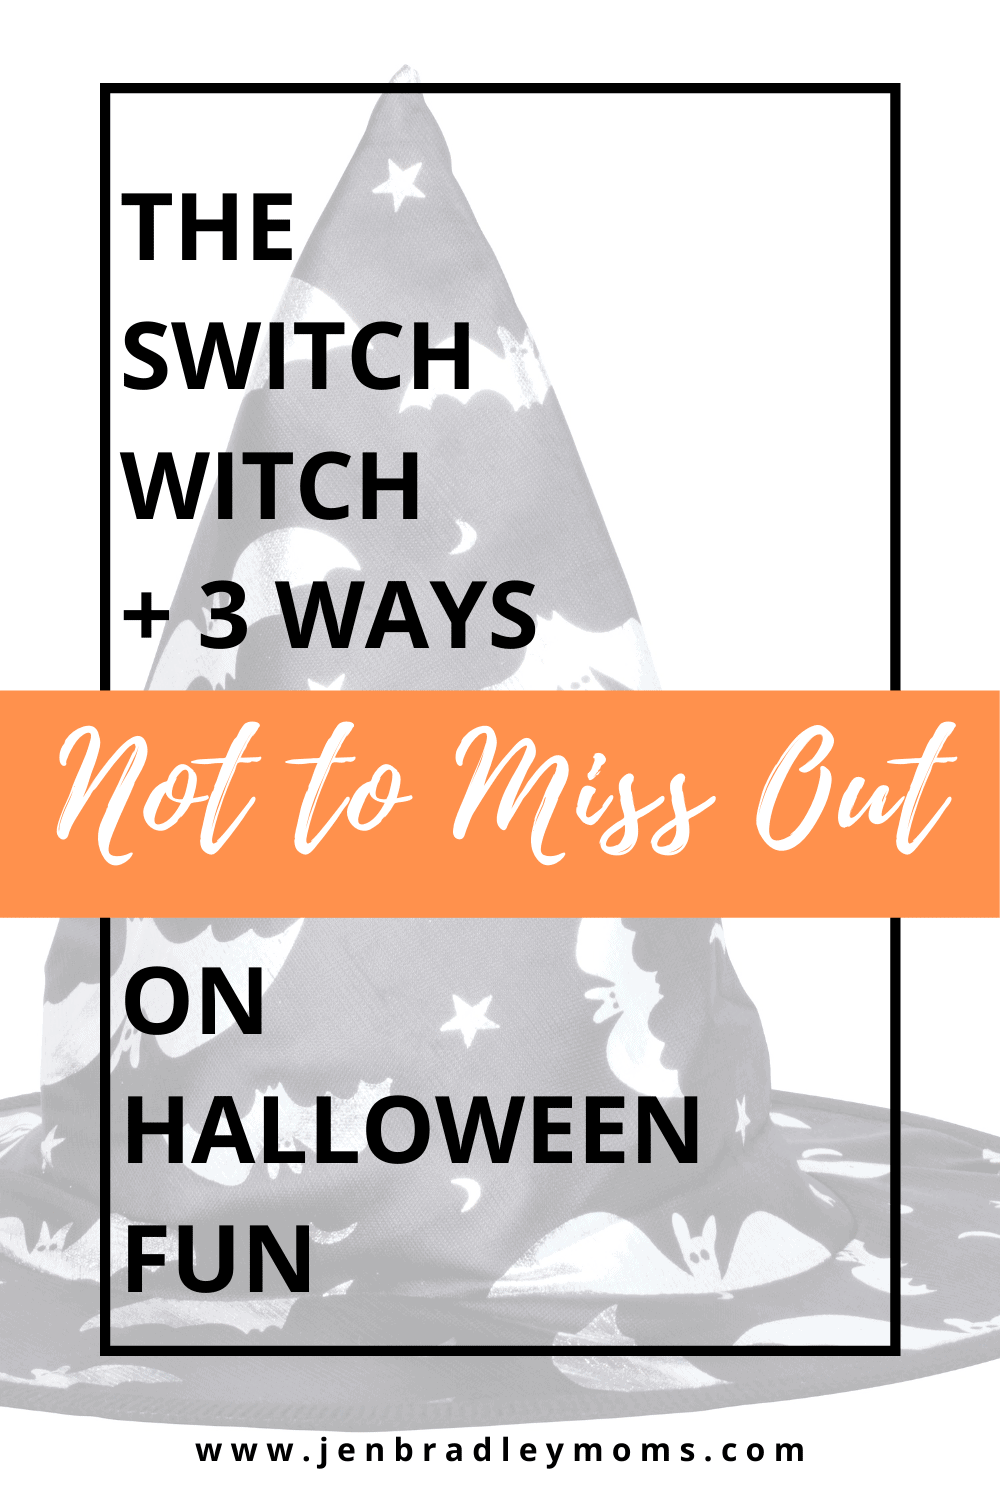 The Switch Witch: Why We Love Her (How She Makes Halloween More Fun!)